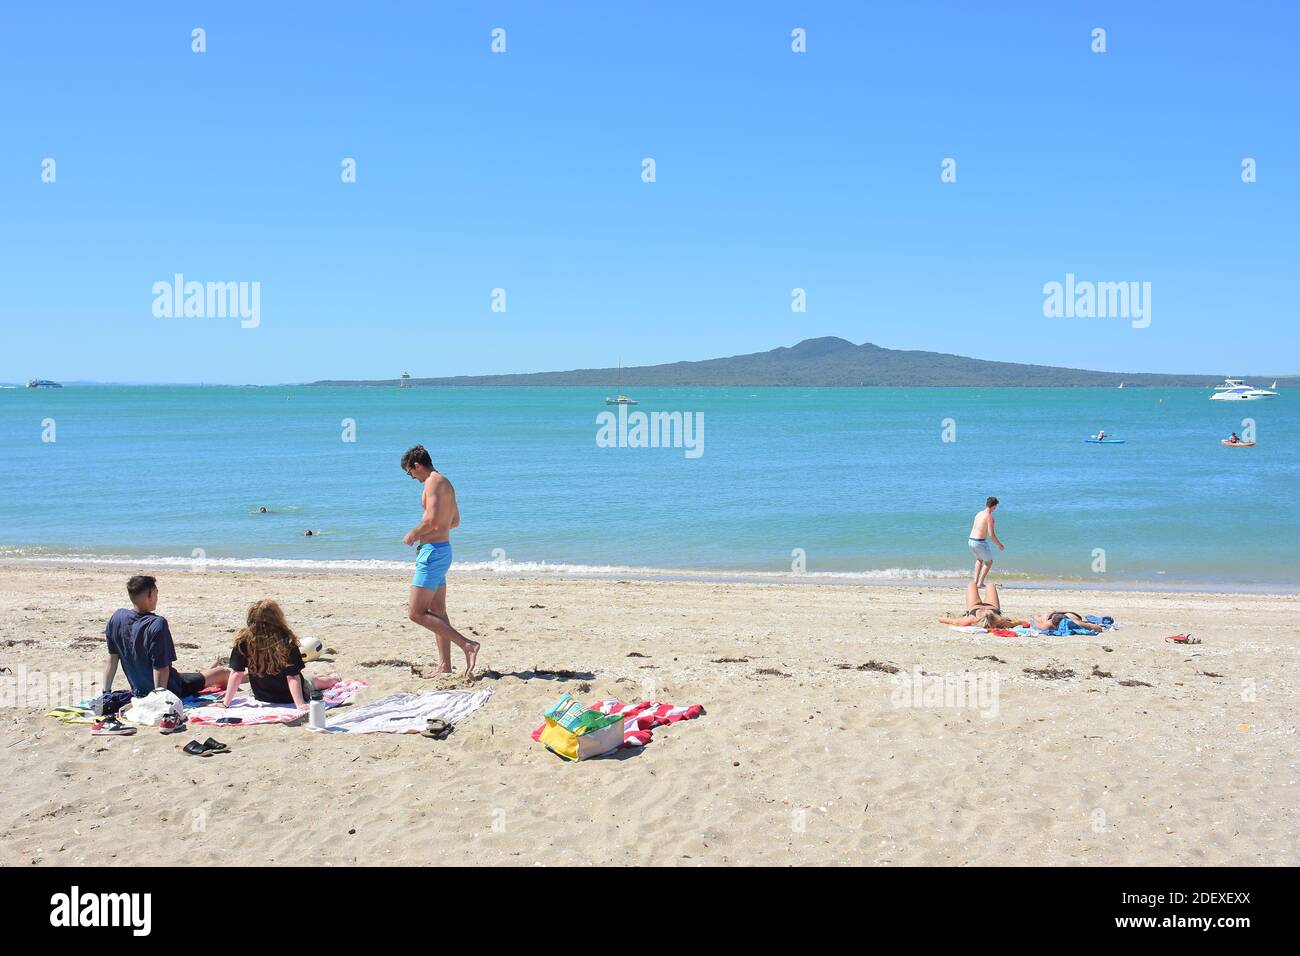 AUCKLAND, NEW ZEALAND - Nov 28, 2020: View of people at Mission Bay beach with Rangitoto Island in background Stock Photo